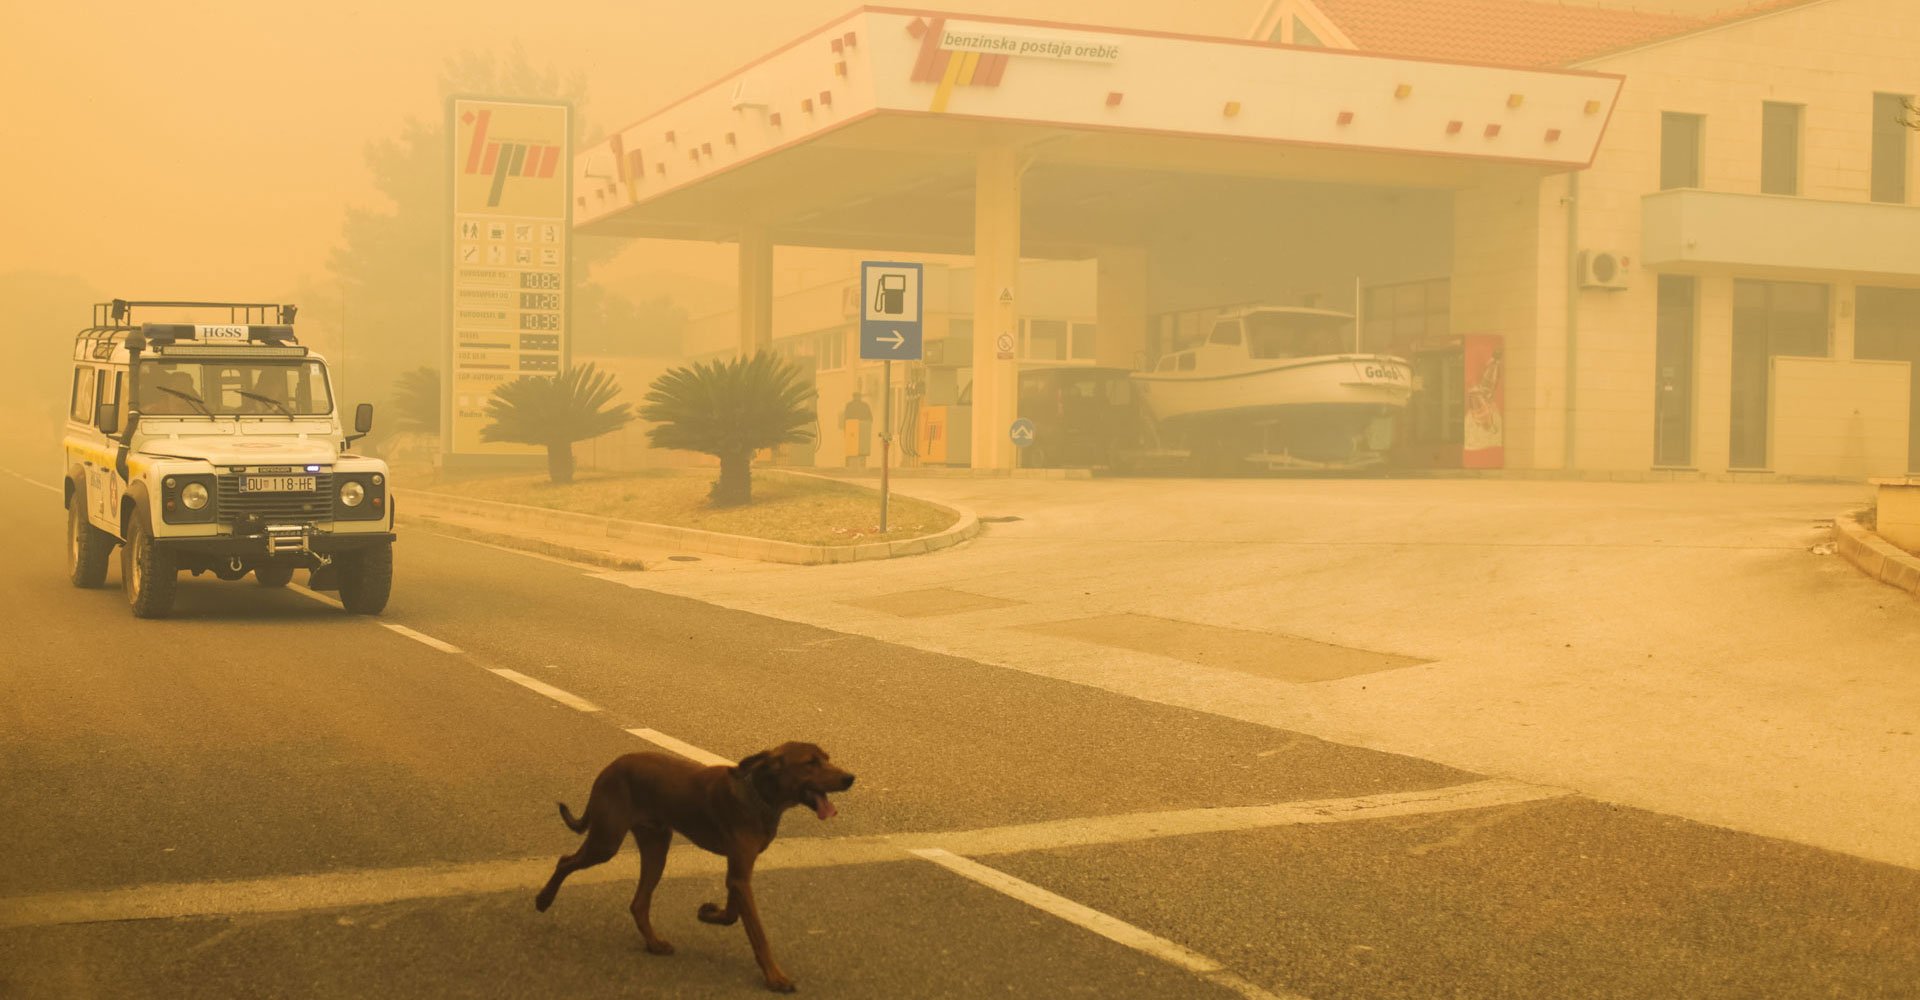 A forest fire in Croatia turns the coastline into a post-apocalyptic vision  